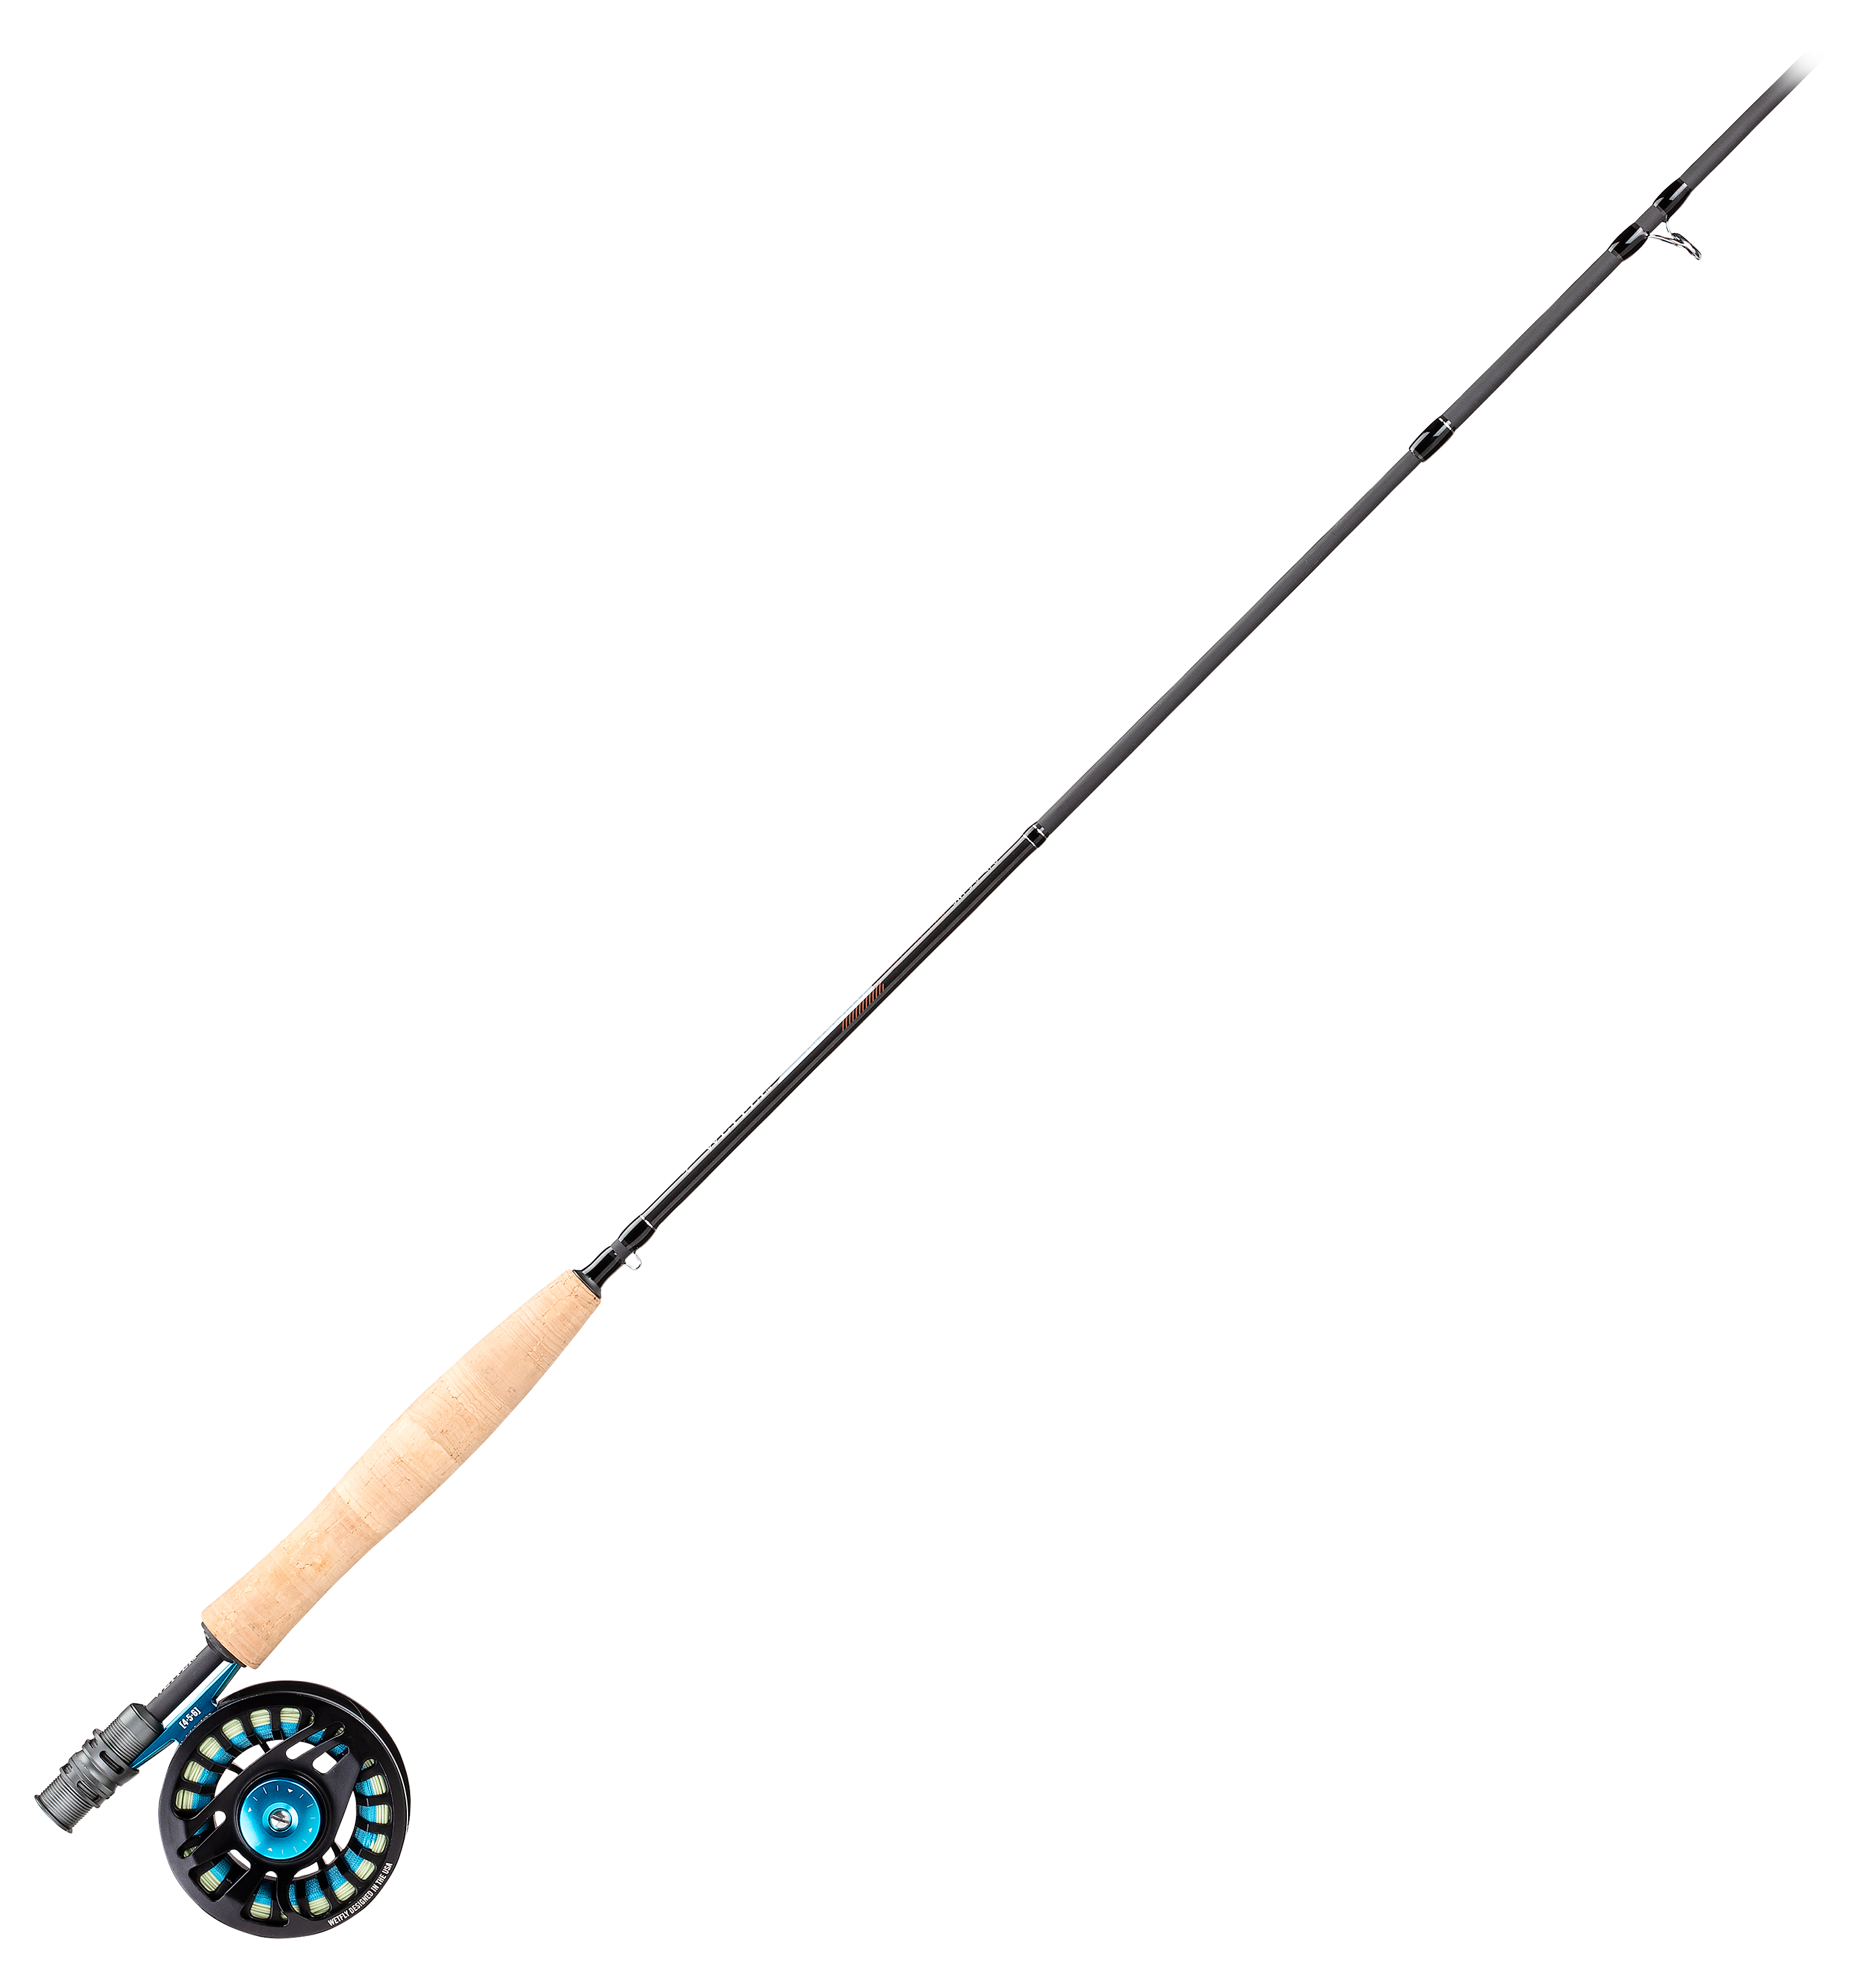 Wetfly Nitrolite Tactical Pro Fly Rod And Reel Outfit 5wt,, 40% OFF